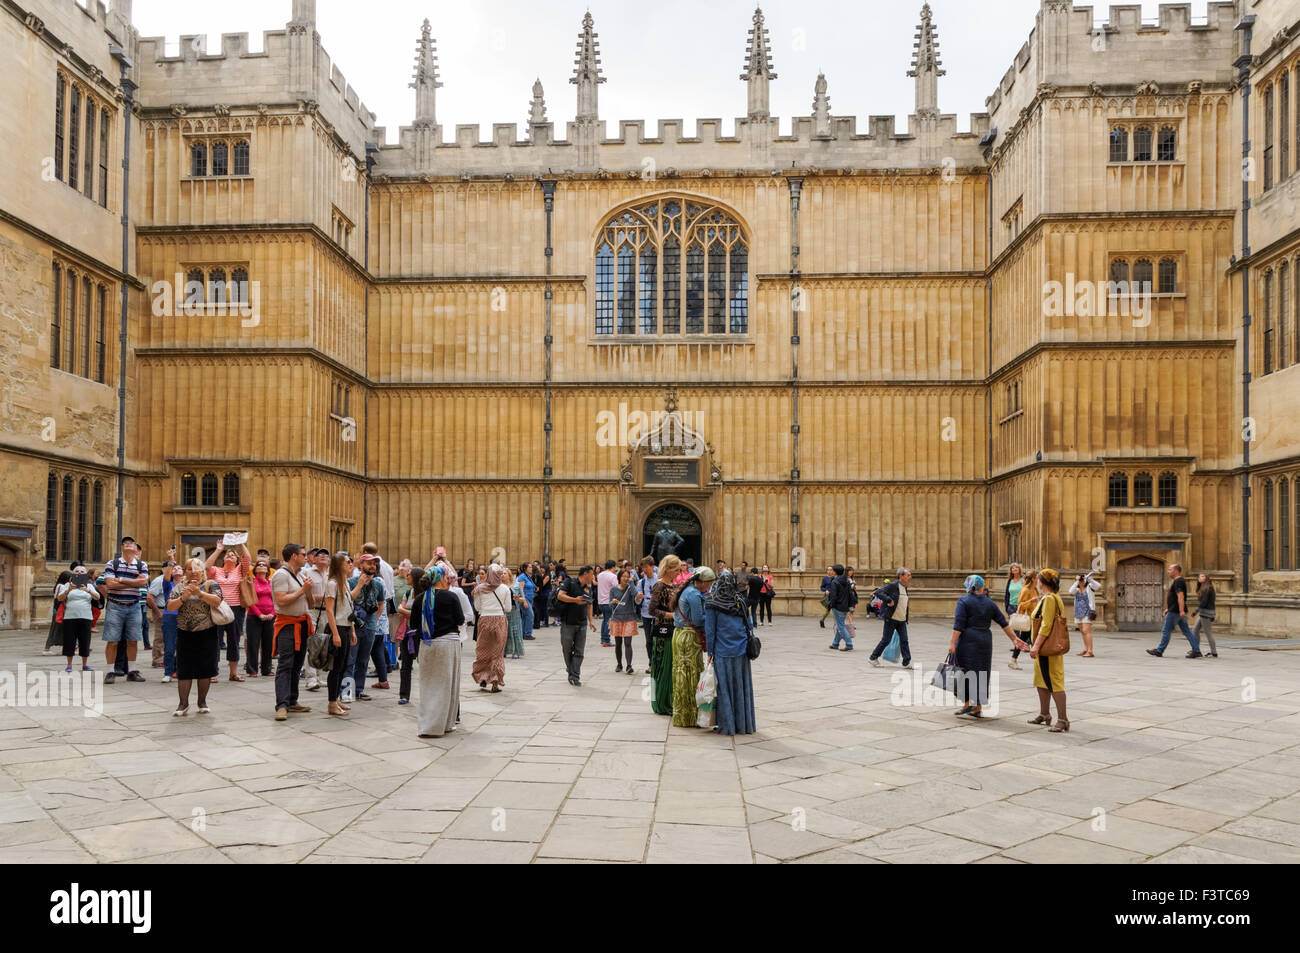 Courtyard of The Bodleian Library (Old Schools Quadrangle) in Oxford Oxfordshire England United Kingdom UK Stock Photo